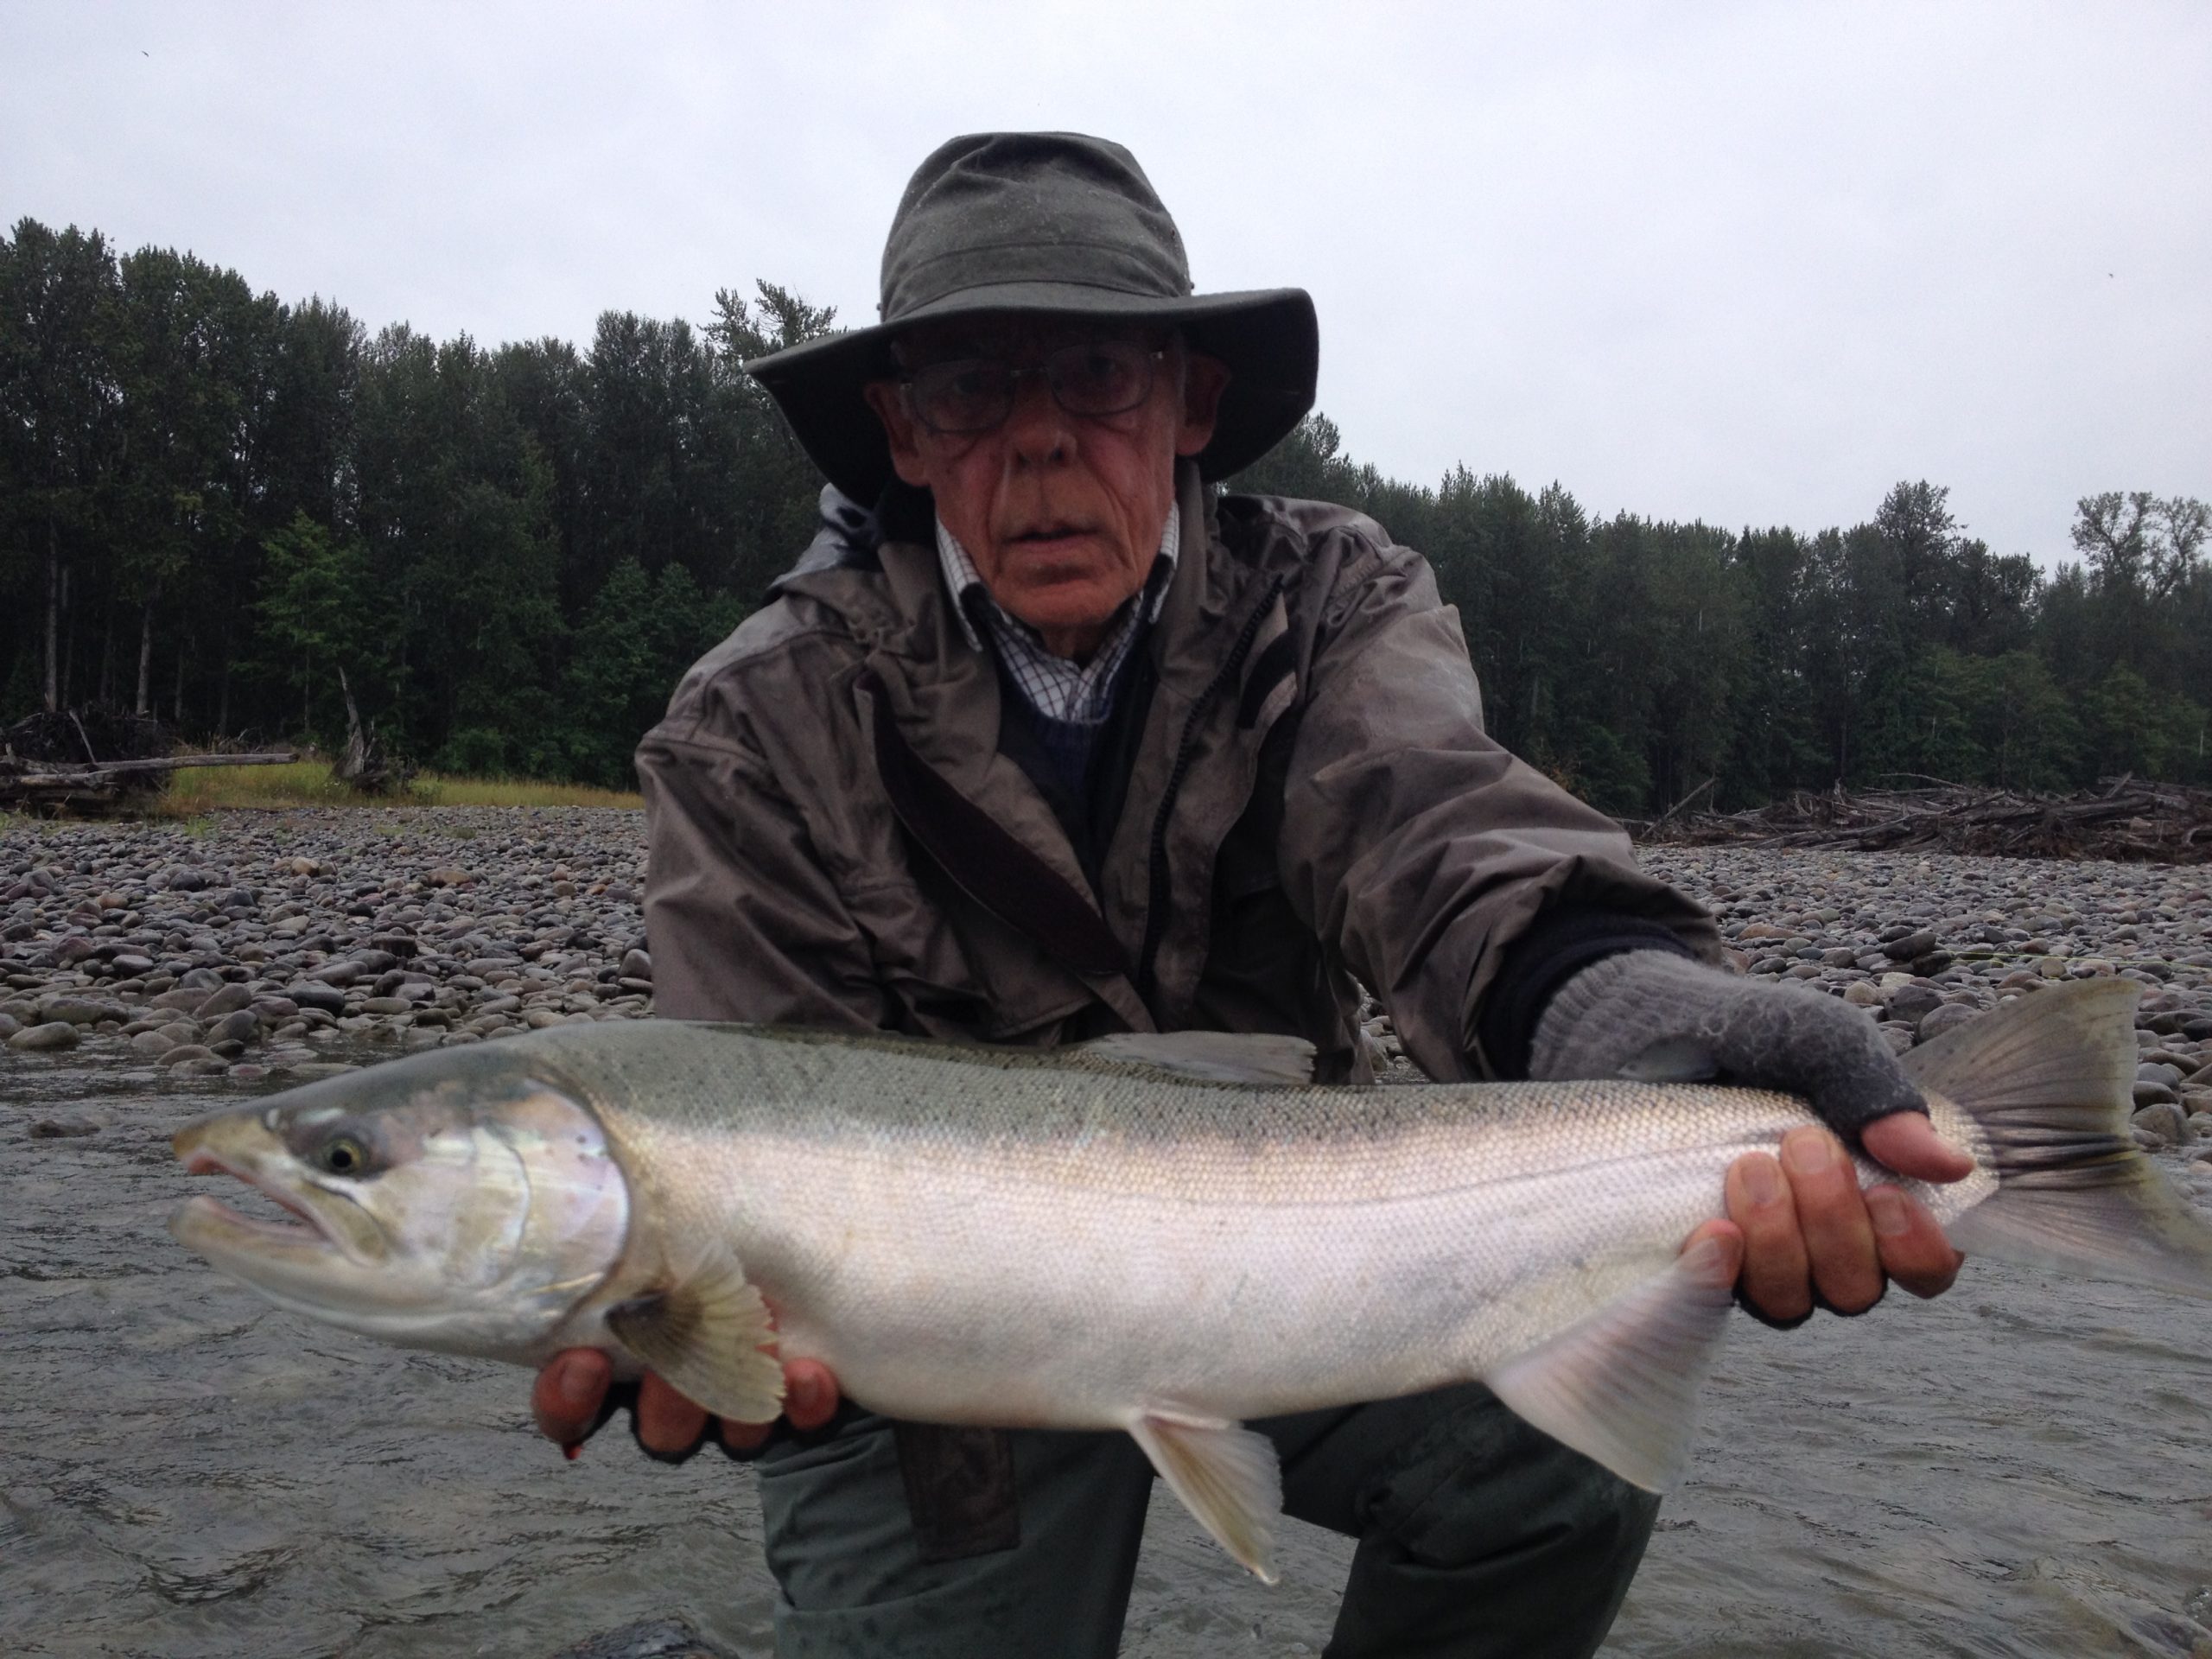 Hosted Kalum River Lodge Report and our customer Tim with another Steelhead from the Skeena River Congratulations Tim.